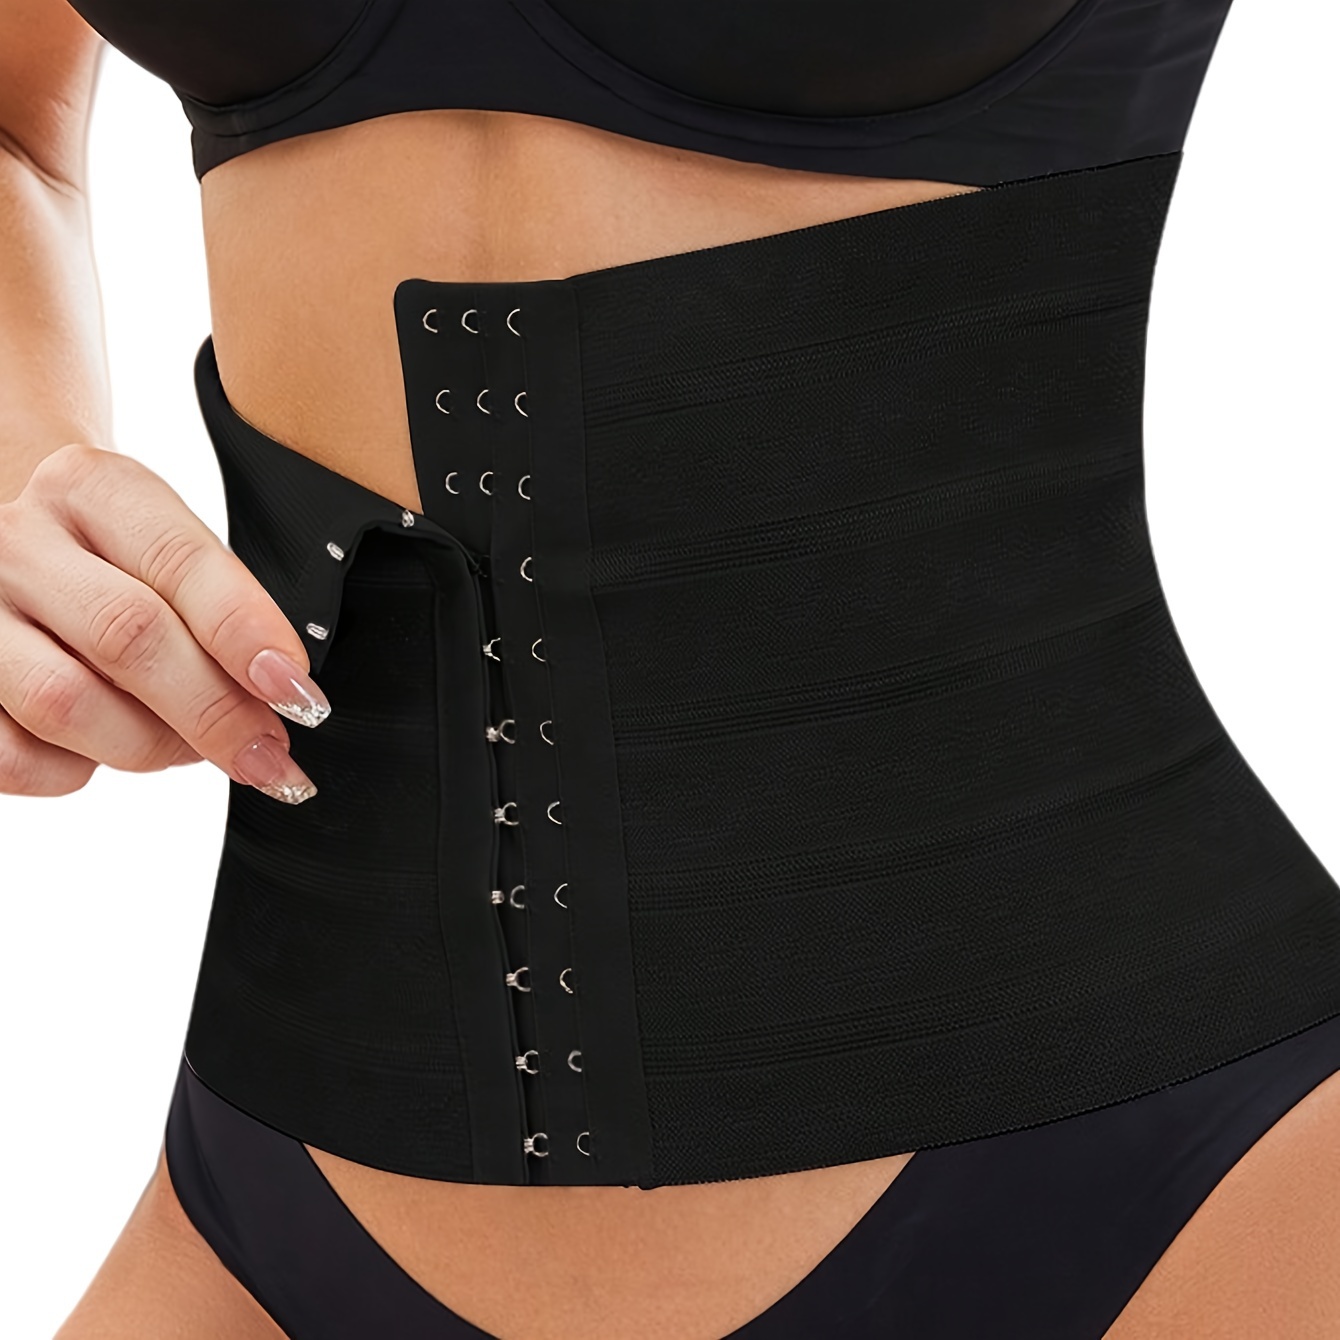 Buy Waist Trainers & Compression Shapewear Online - On Sale Now